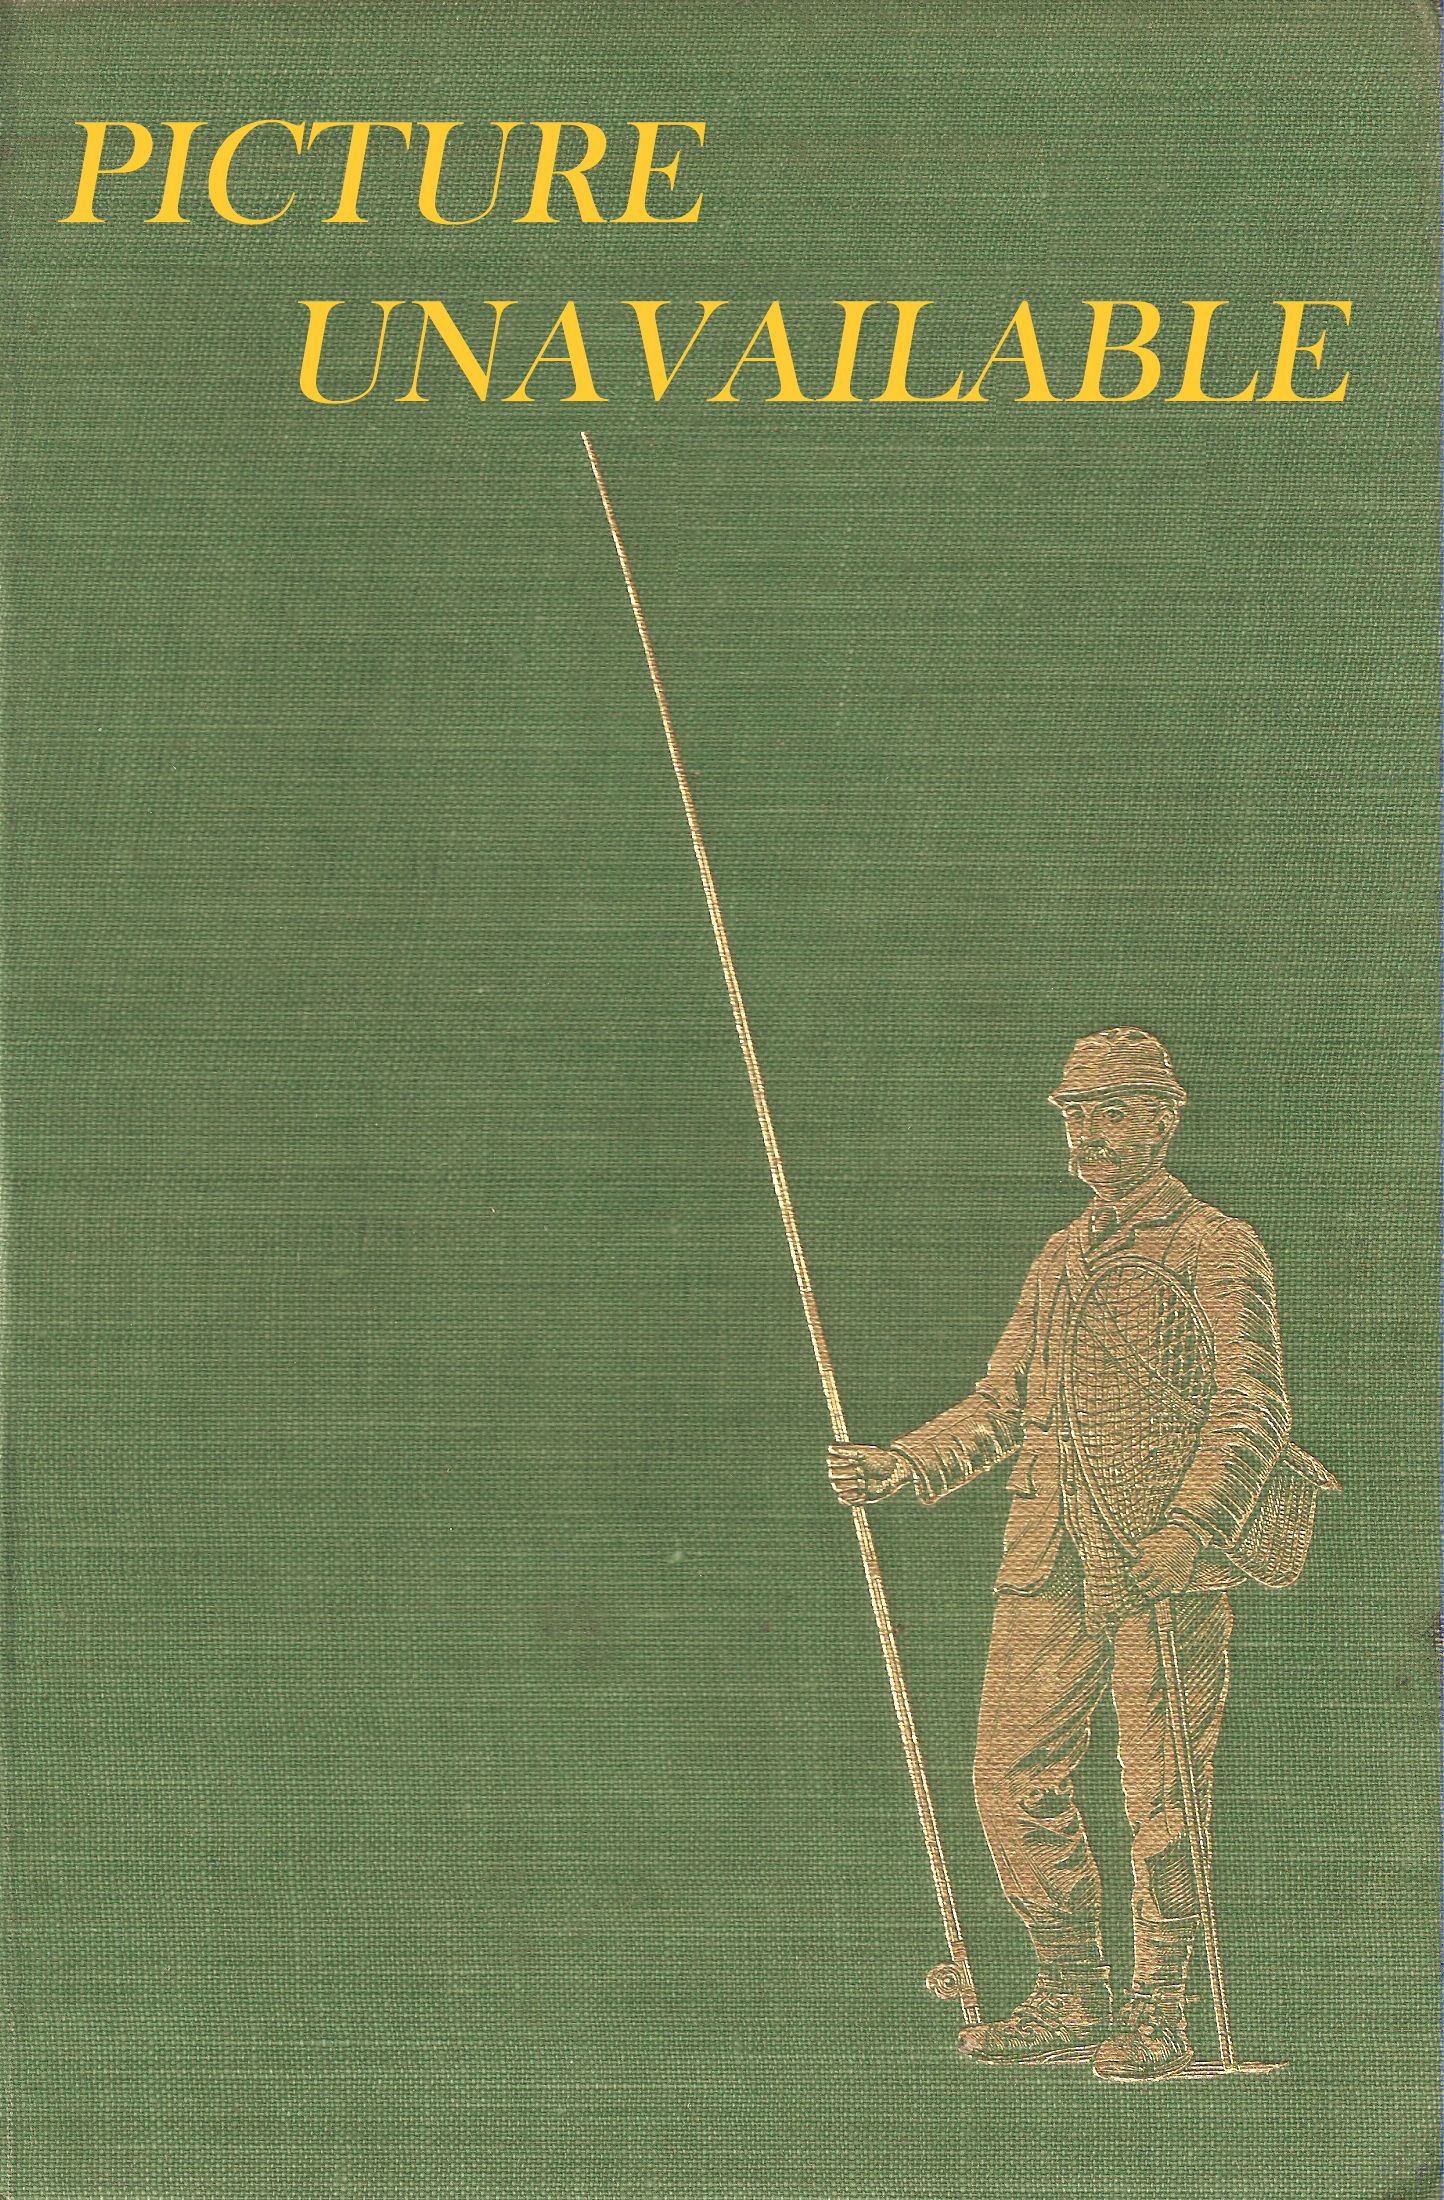 AN ANGLER'S HOURS. By H.T. Sheringham. Illustrated by Paul Cook.